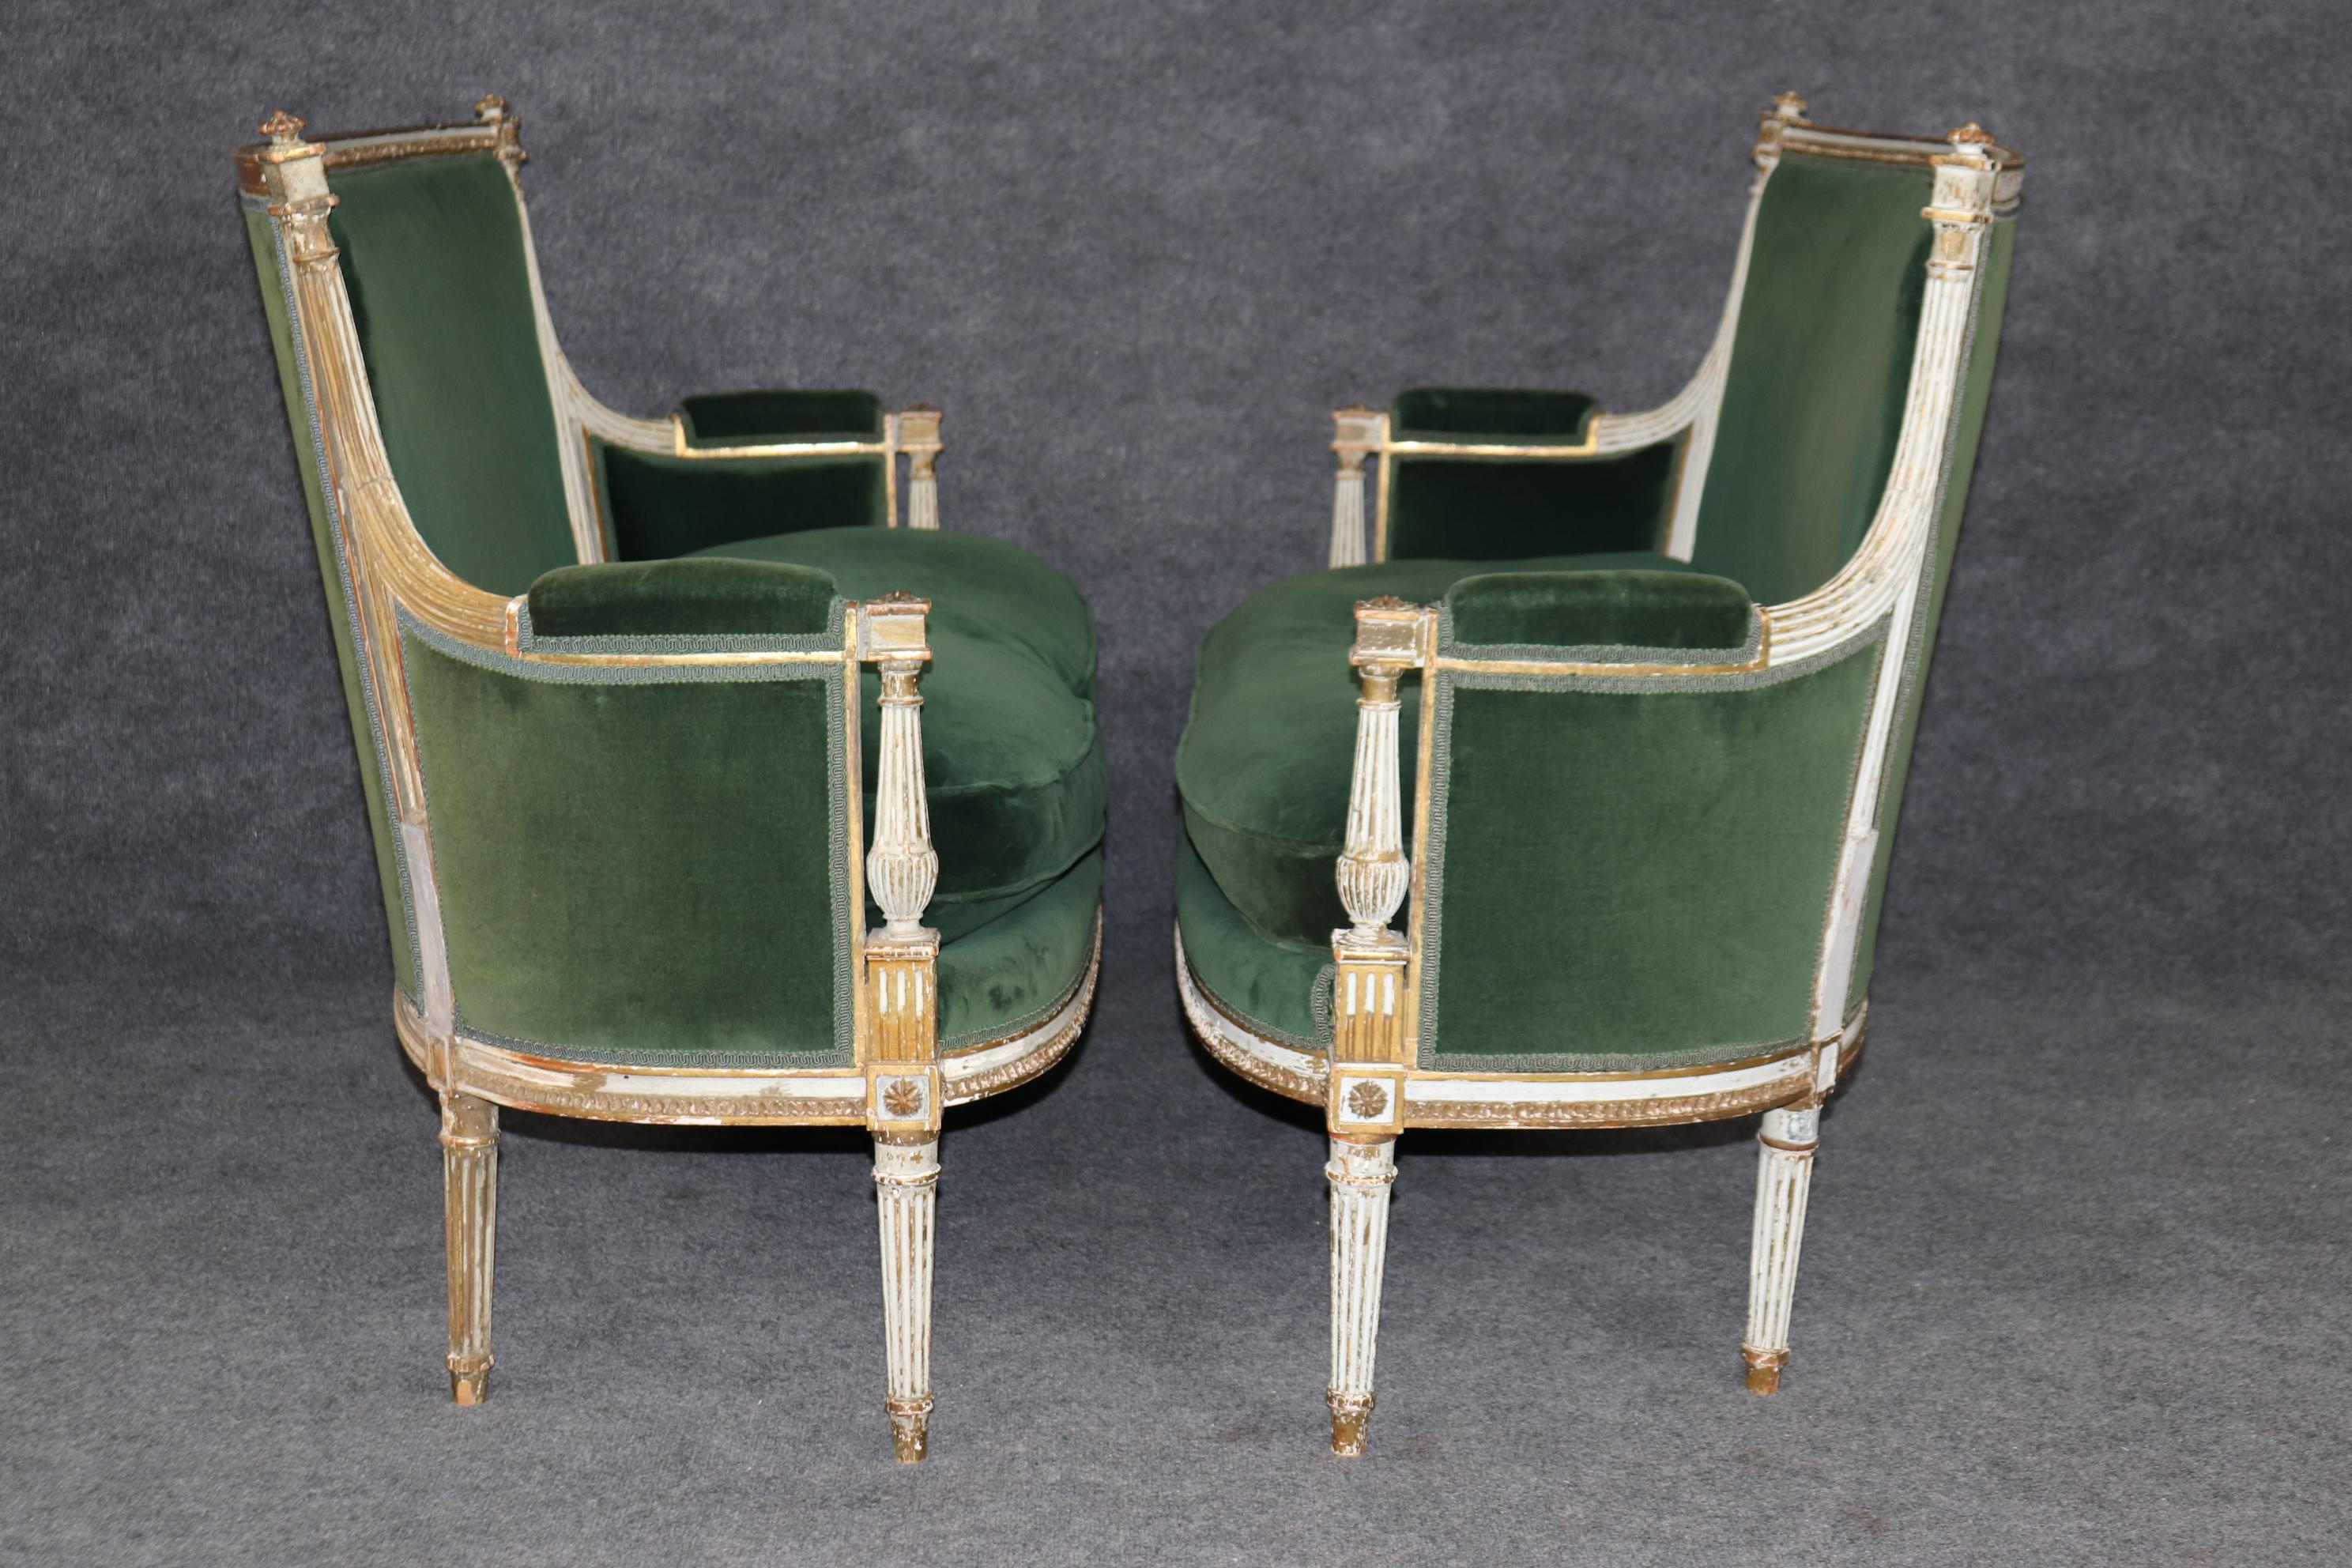 Rare Matched Pair 19th century French Louis XVI Style Distressed Painted Settees In Good Condition For Sale In Swedesboro, NJ